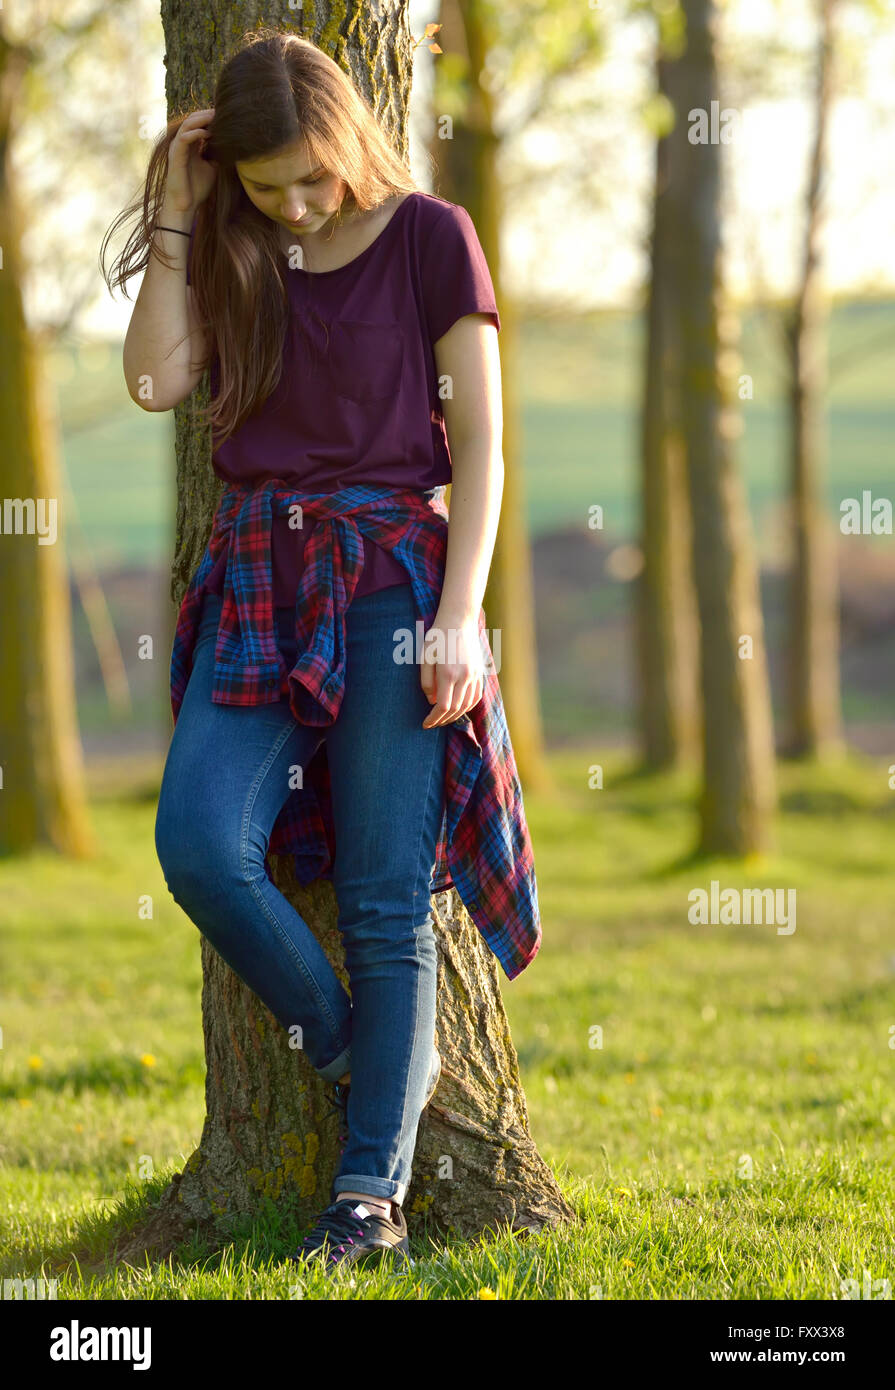 Portrait of a Pretty Teen Girl Standing in a Forest Stock Photo